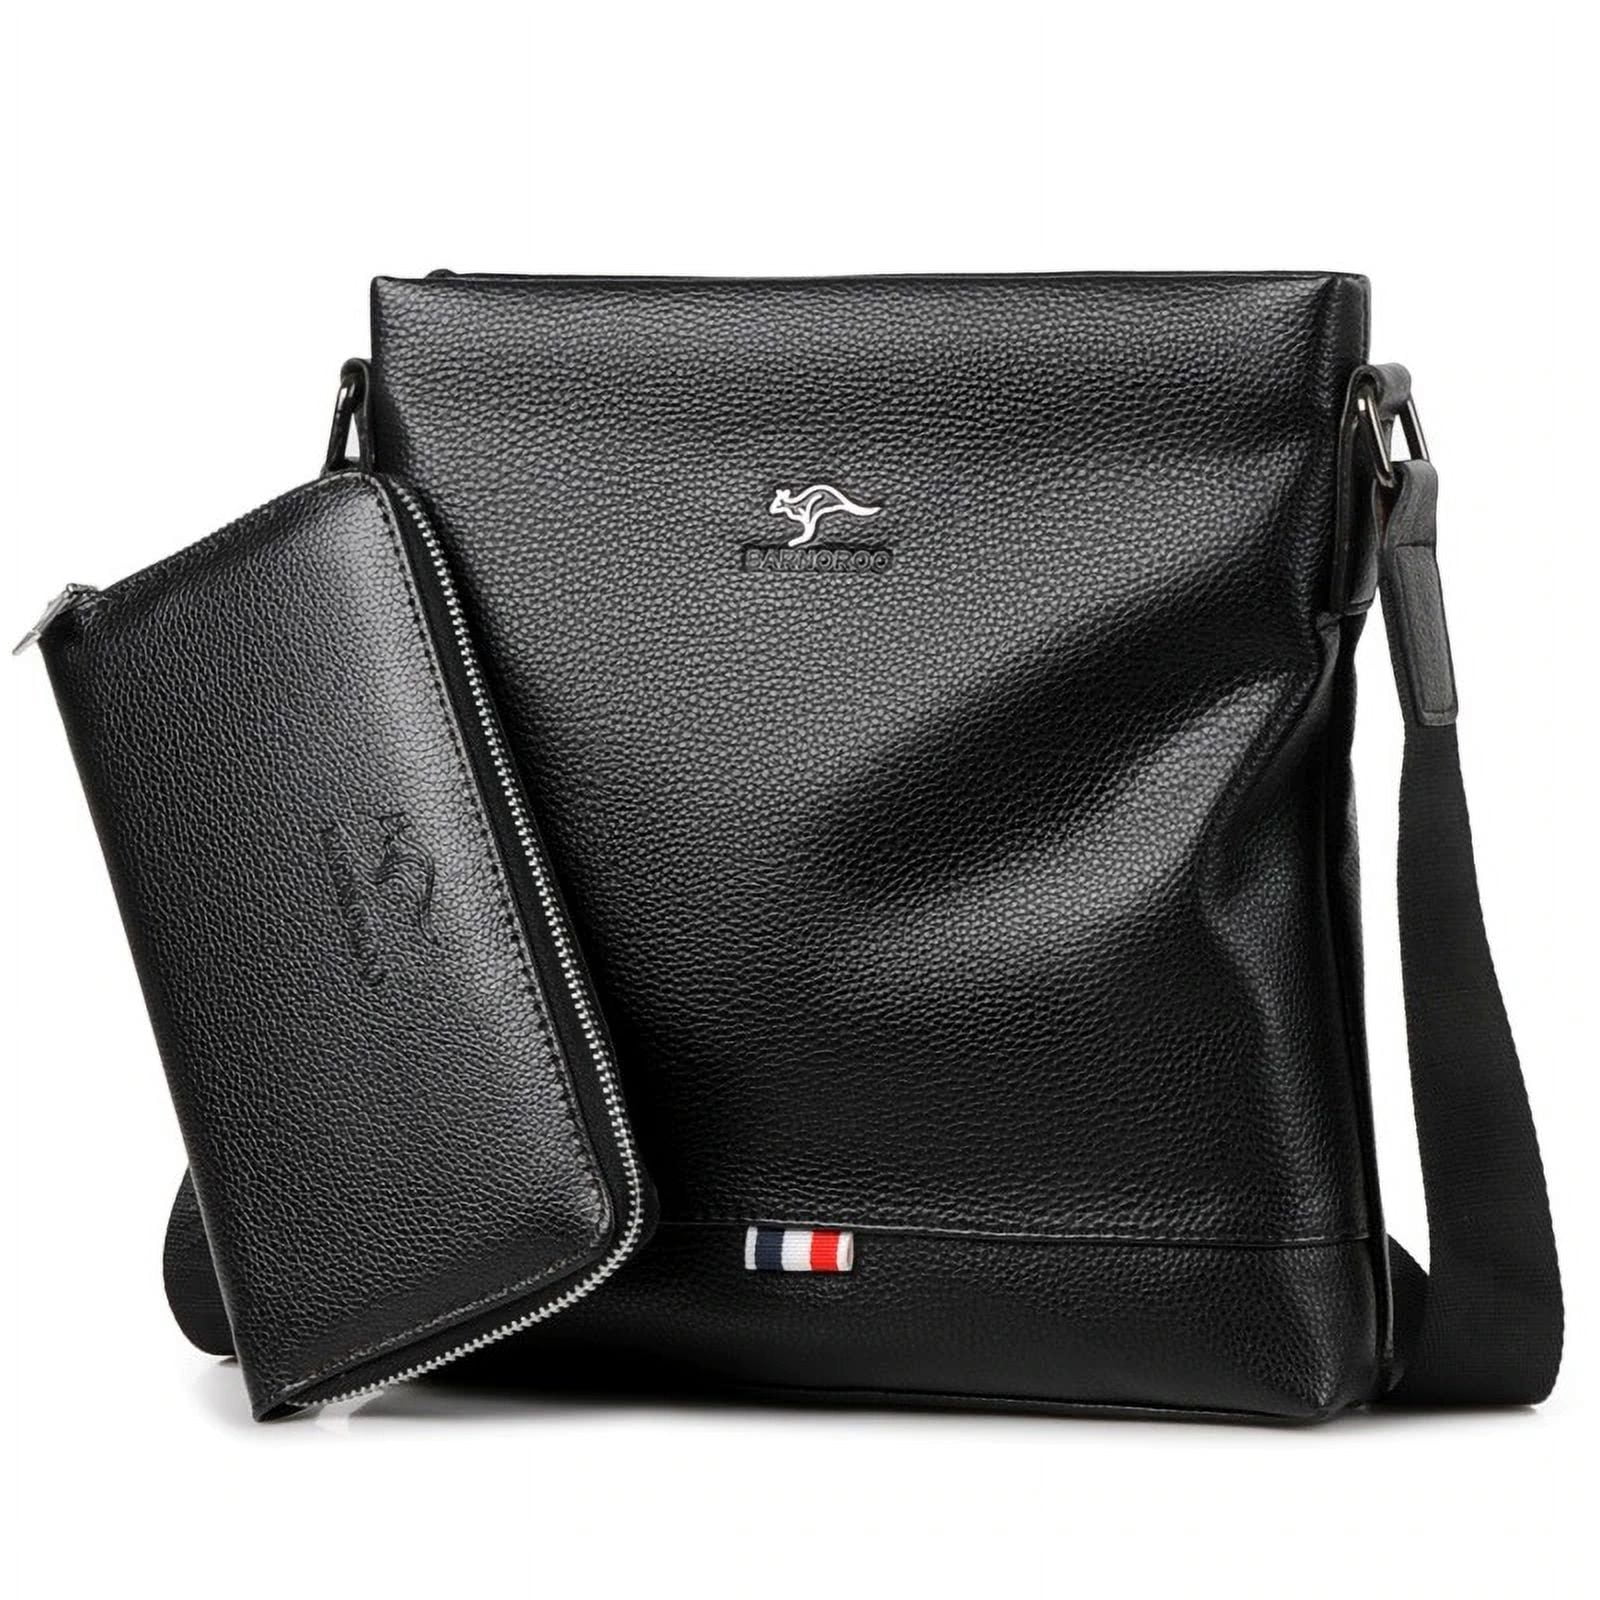 New Luxury Brand Casual Male Messenger Bags Leater Shoulder Bag